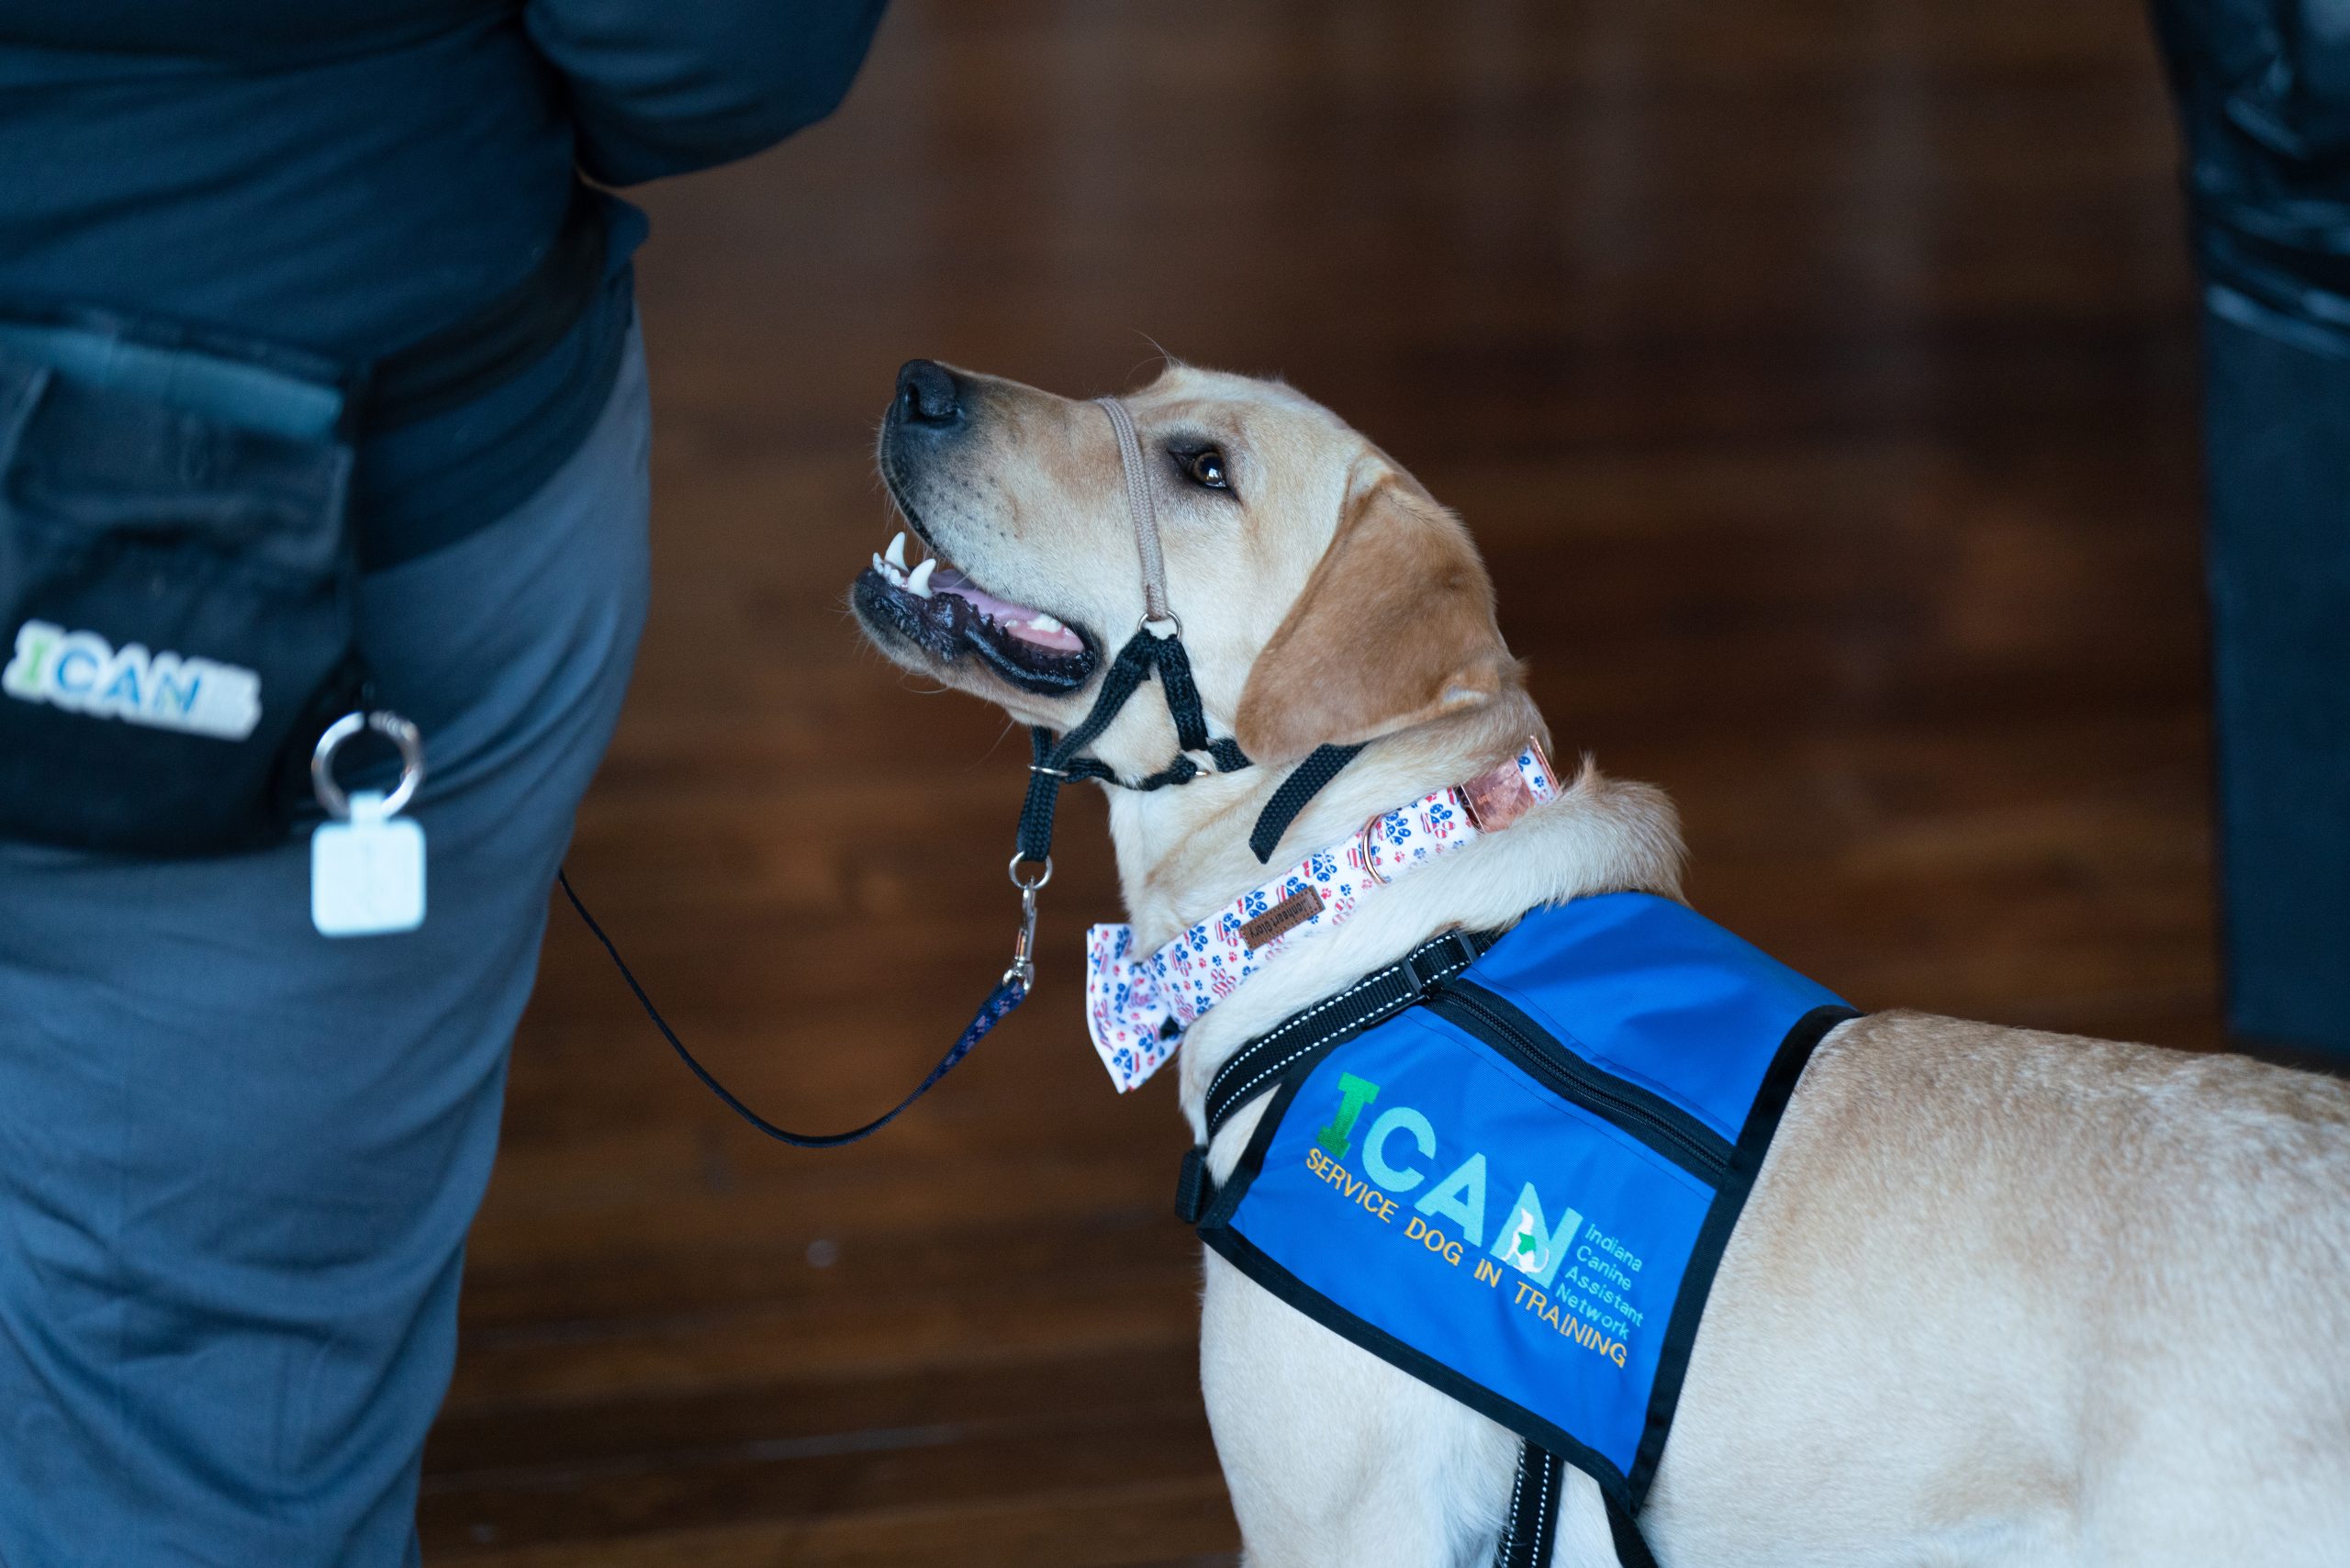 what qualifies a dog to be a service dog